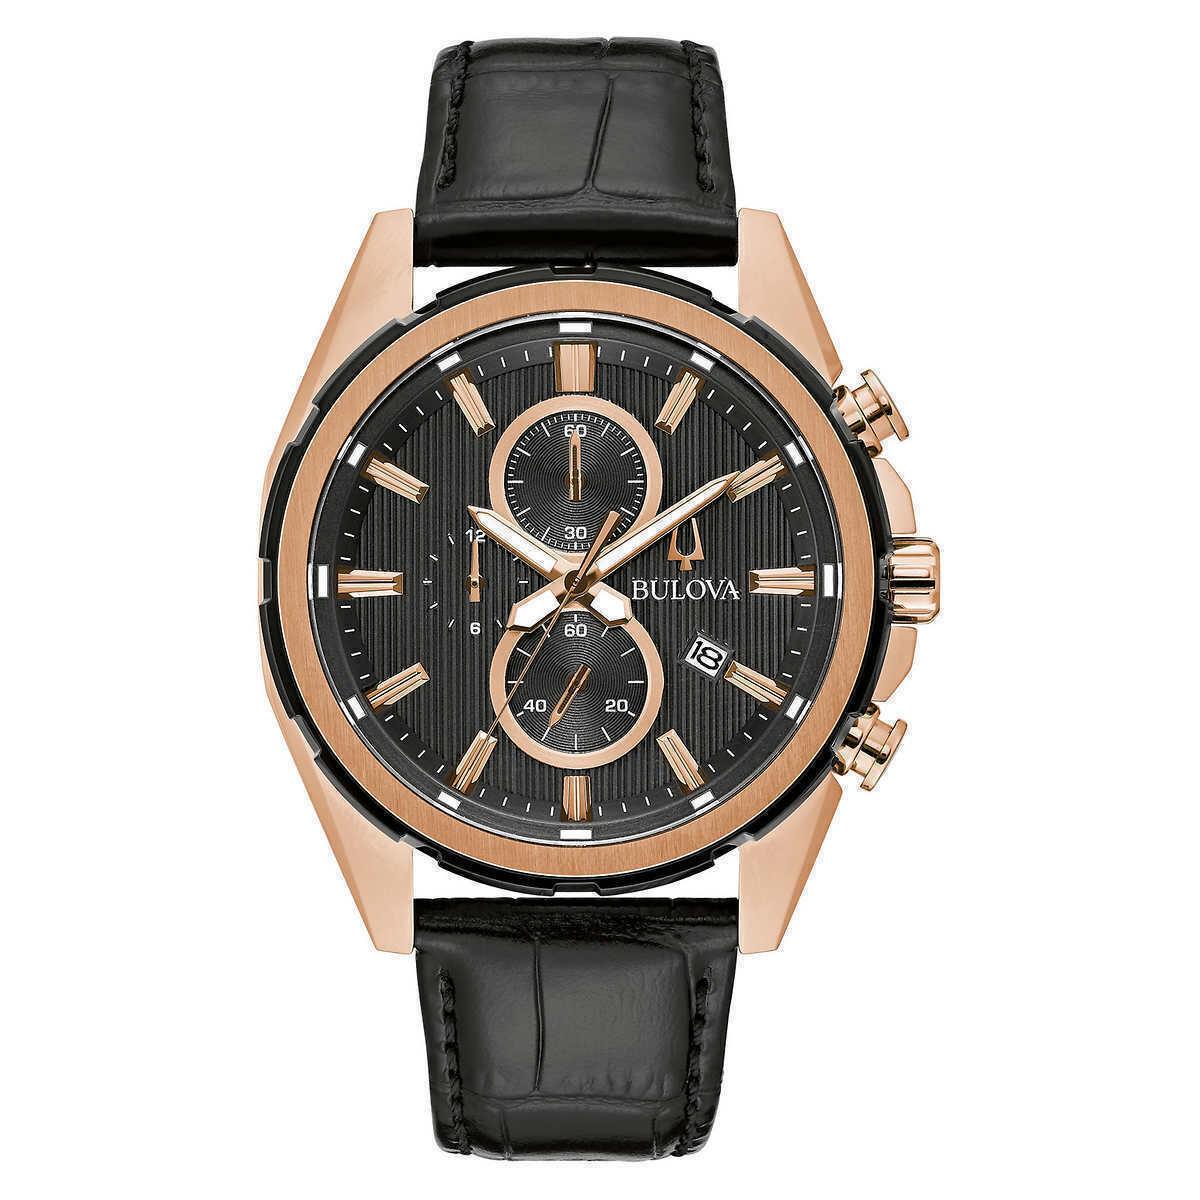 Bulova 98A262 Rose Gold-tone Stainless Steel Leather Band Chronograph Watch